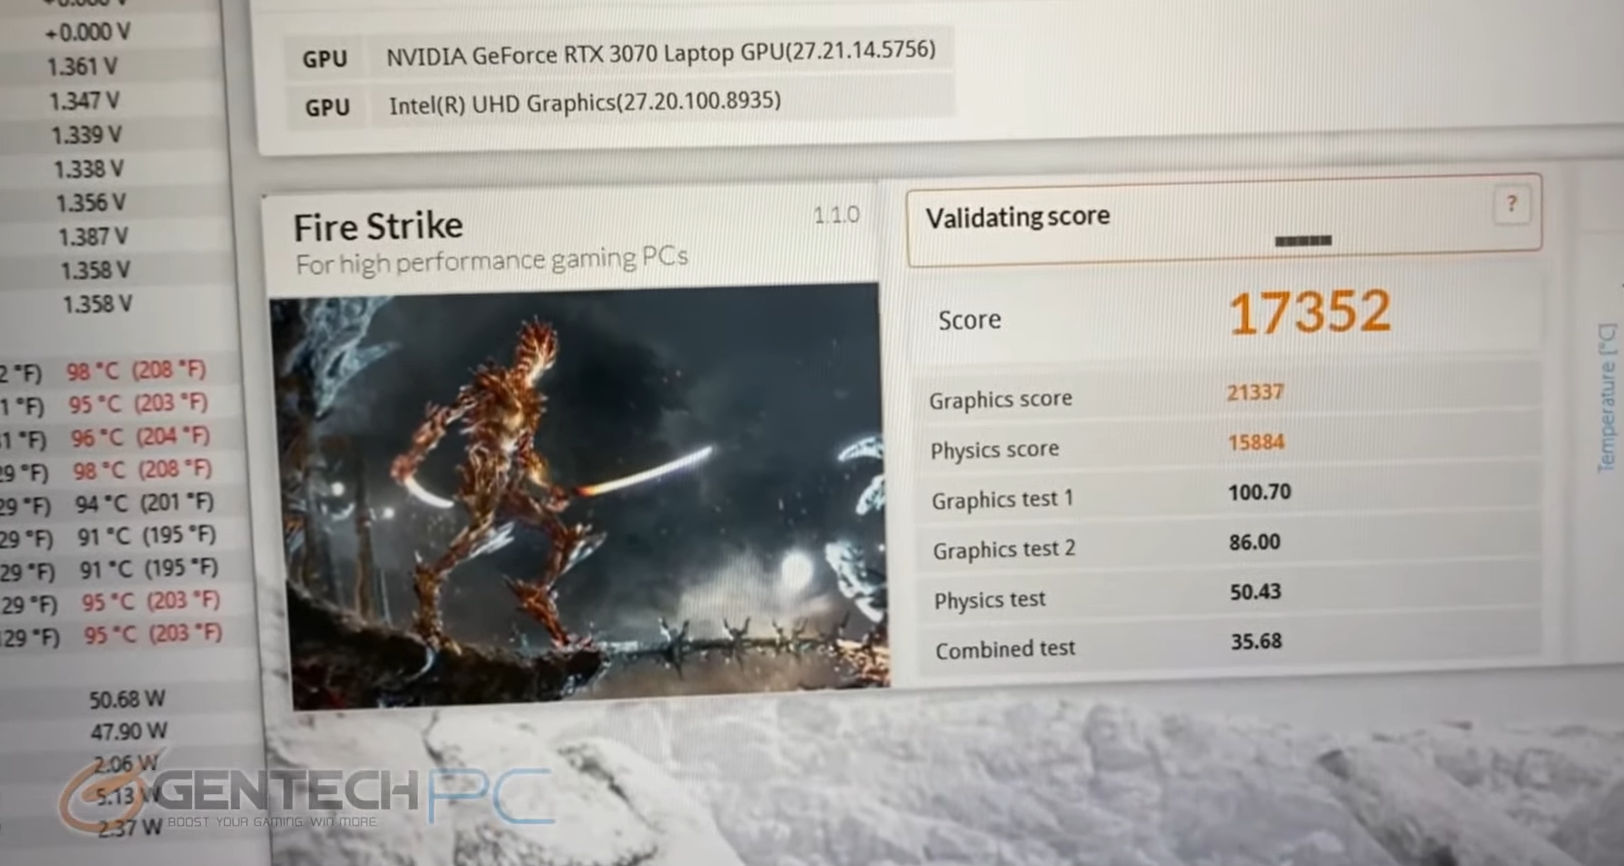 Geforce Rtx 3070 Max P Is 30 Faster Than Max Q In Msi Gaming Laptops Videocardz Com